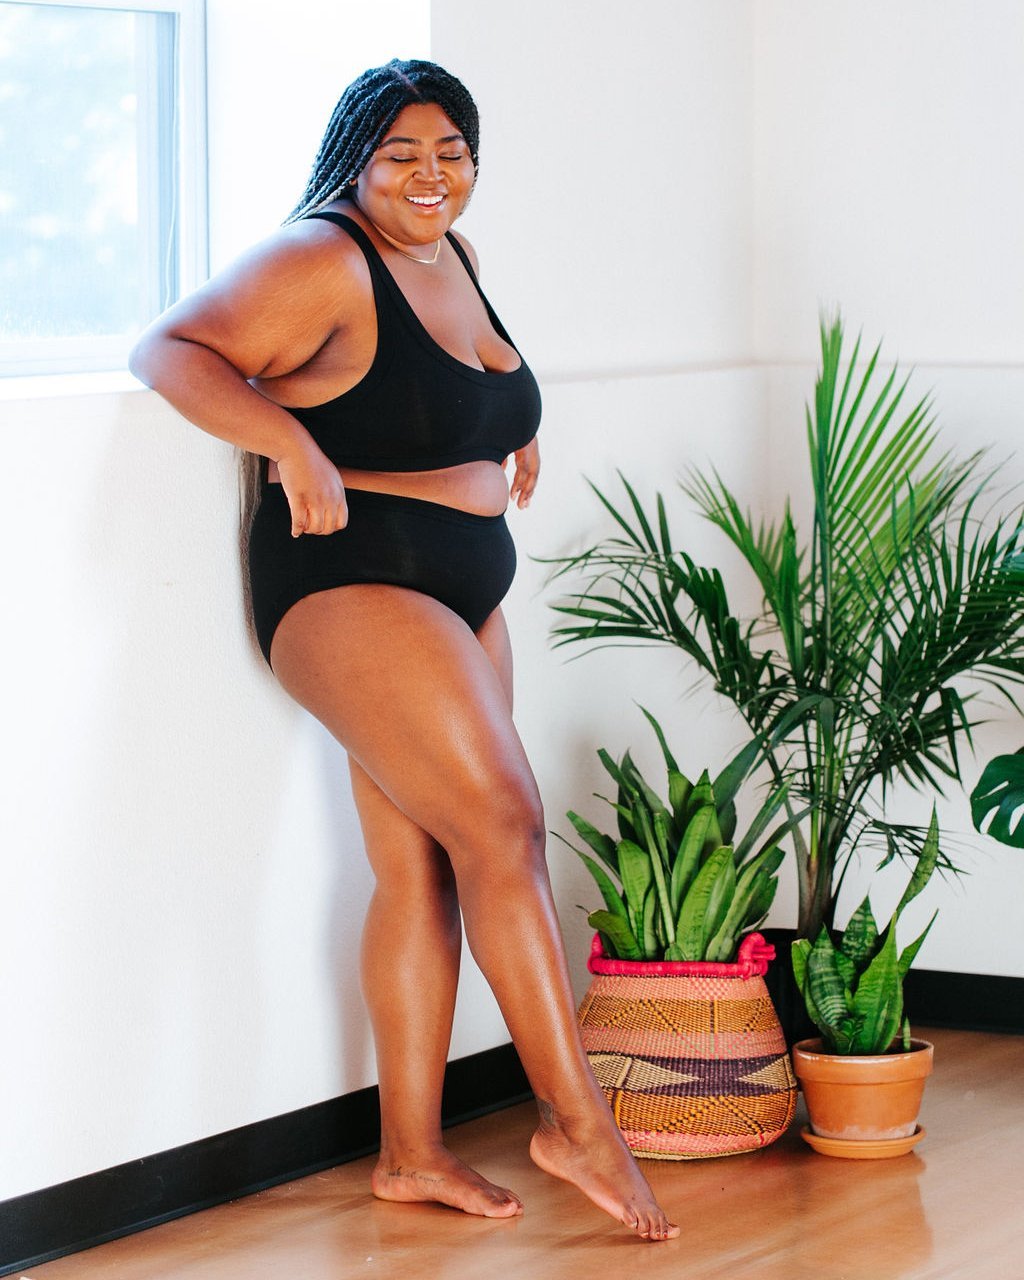 Smiling plus-sized model wearing Thunderpants organic cotton Hipster style underwear and Bralette in plain black surrounded by plants.